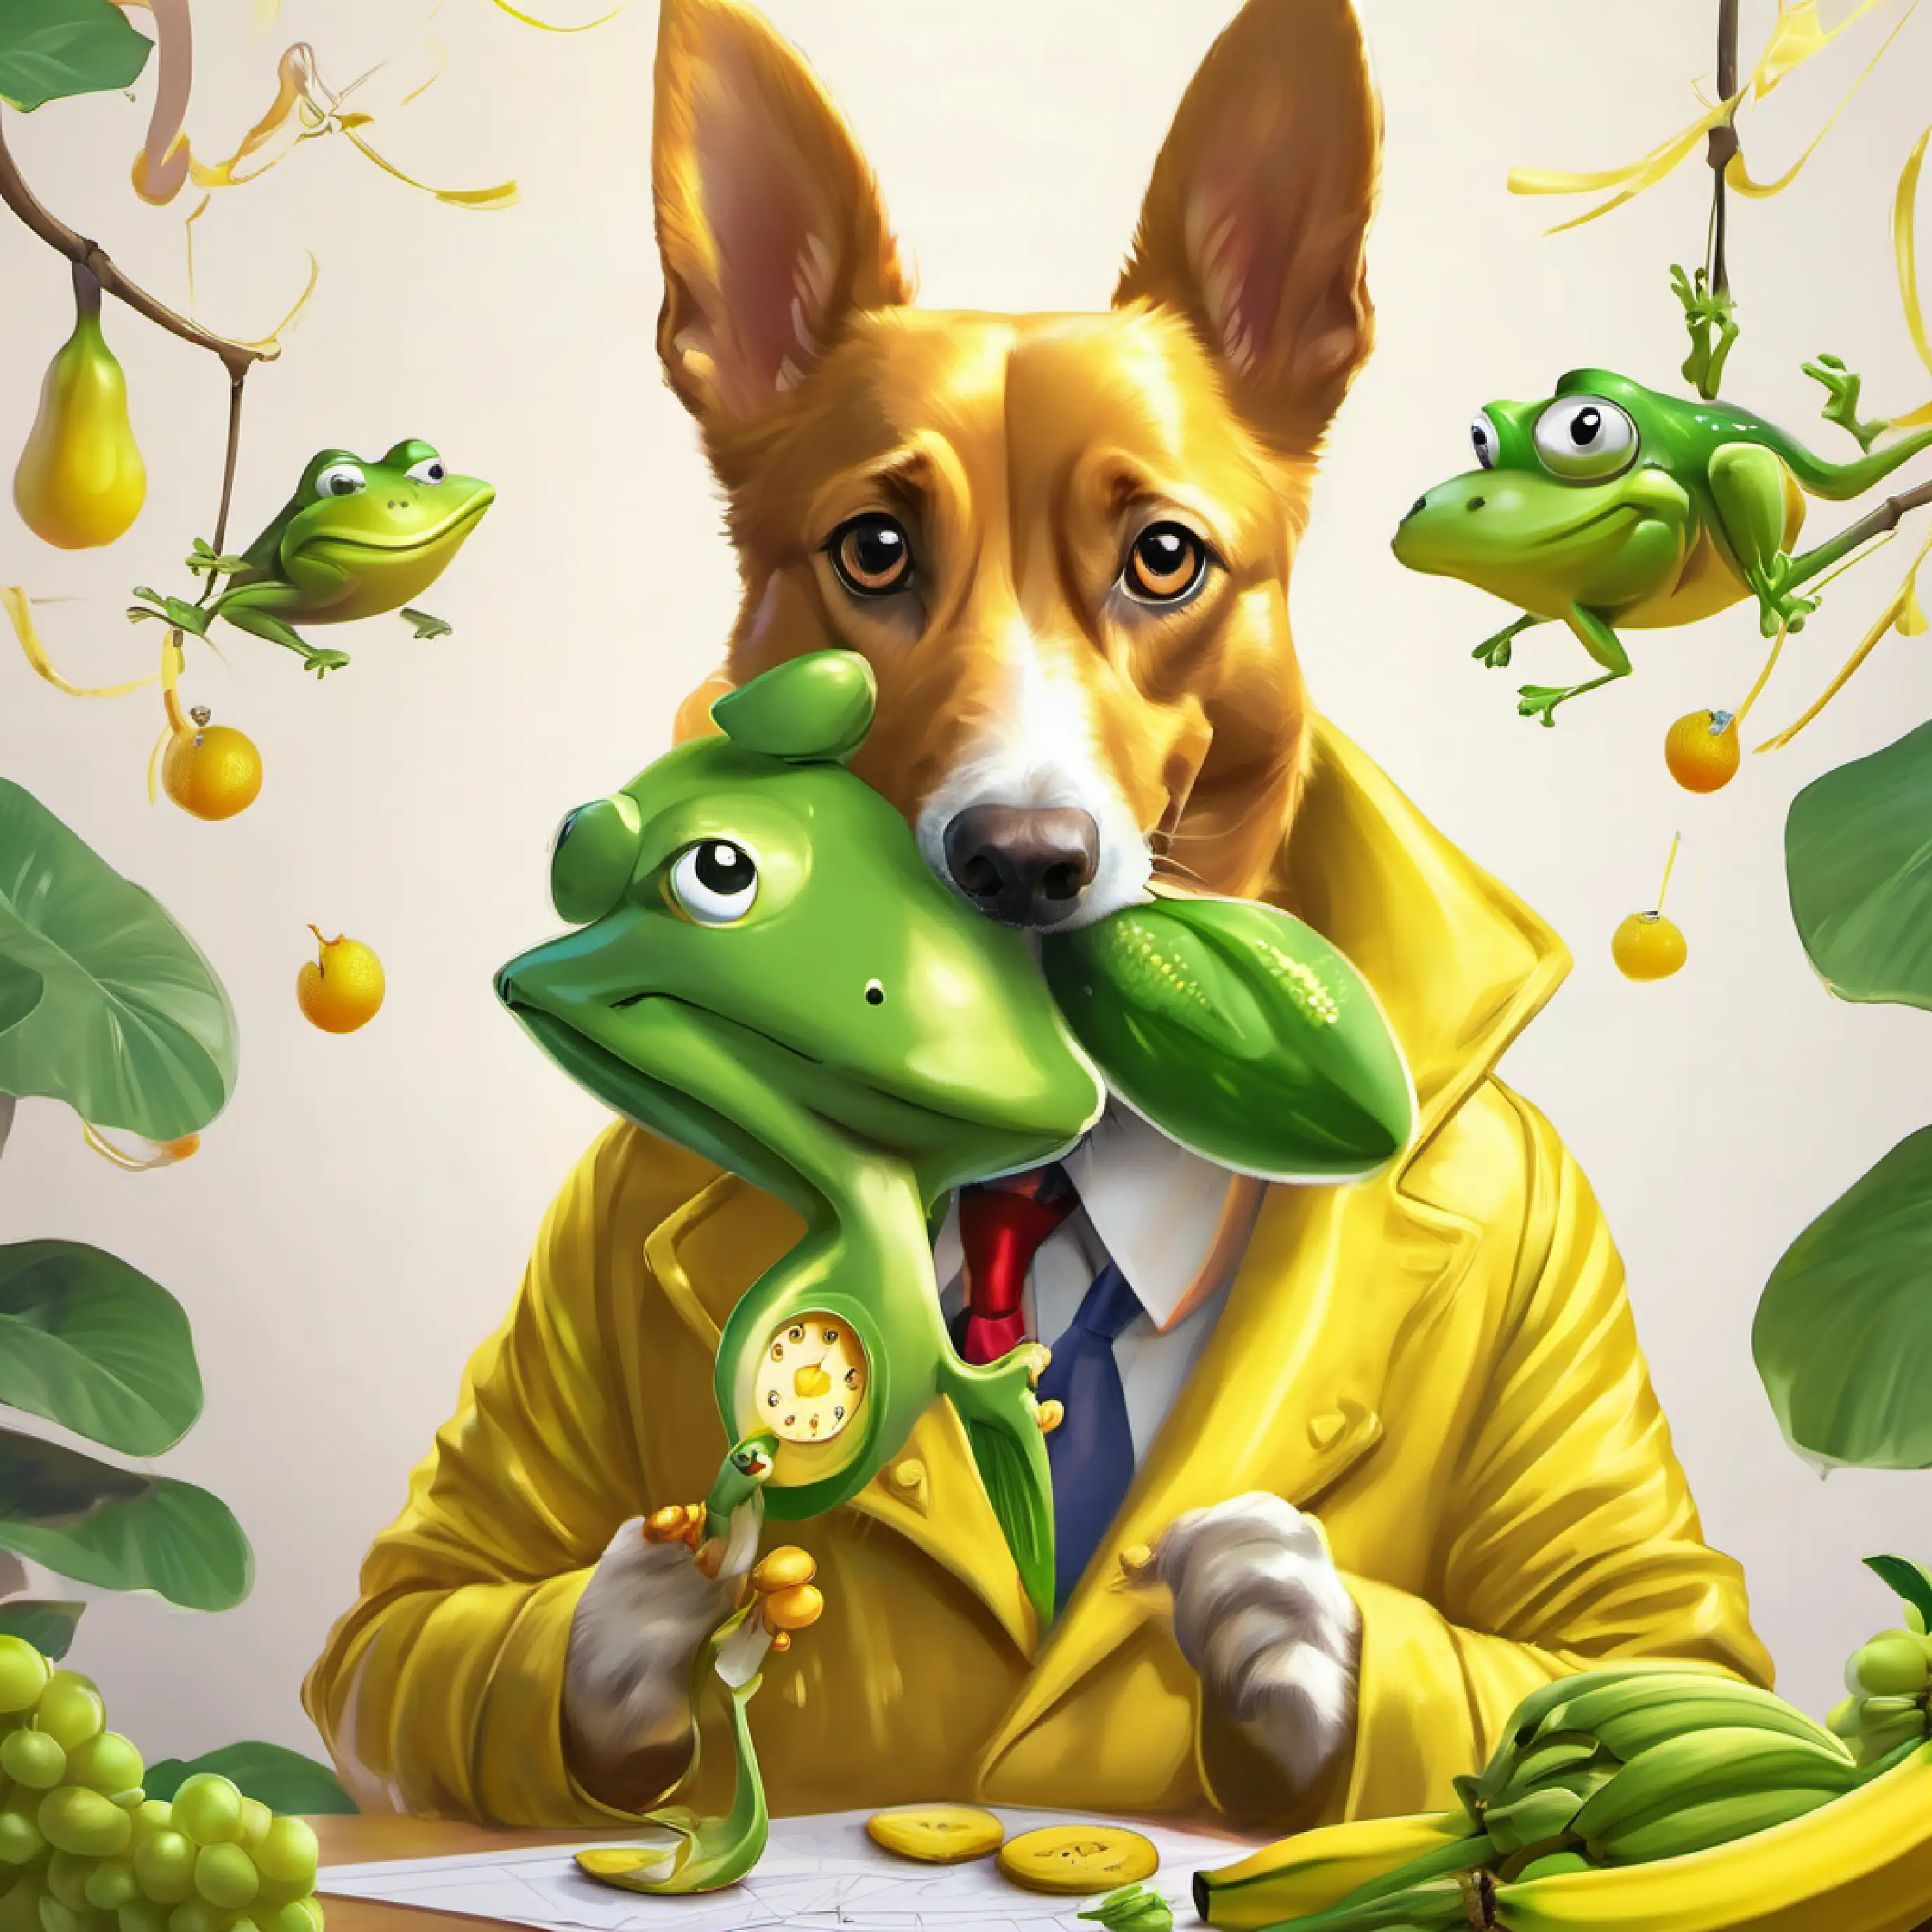 Golden coat, loves bananas, smart dog teaches the frogs simple math.